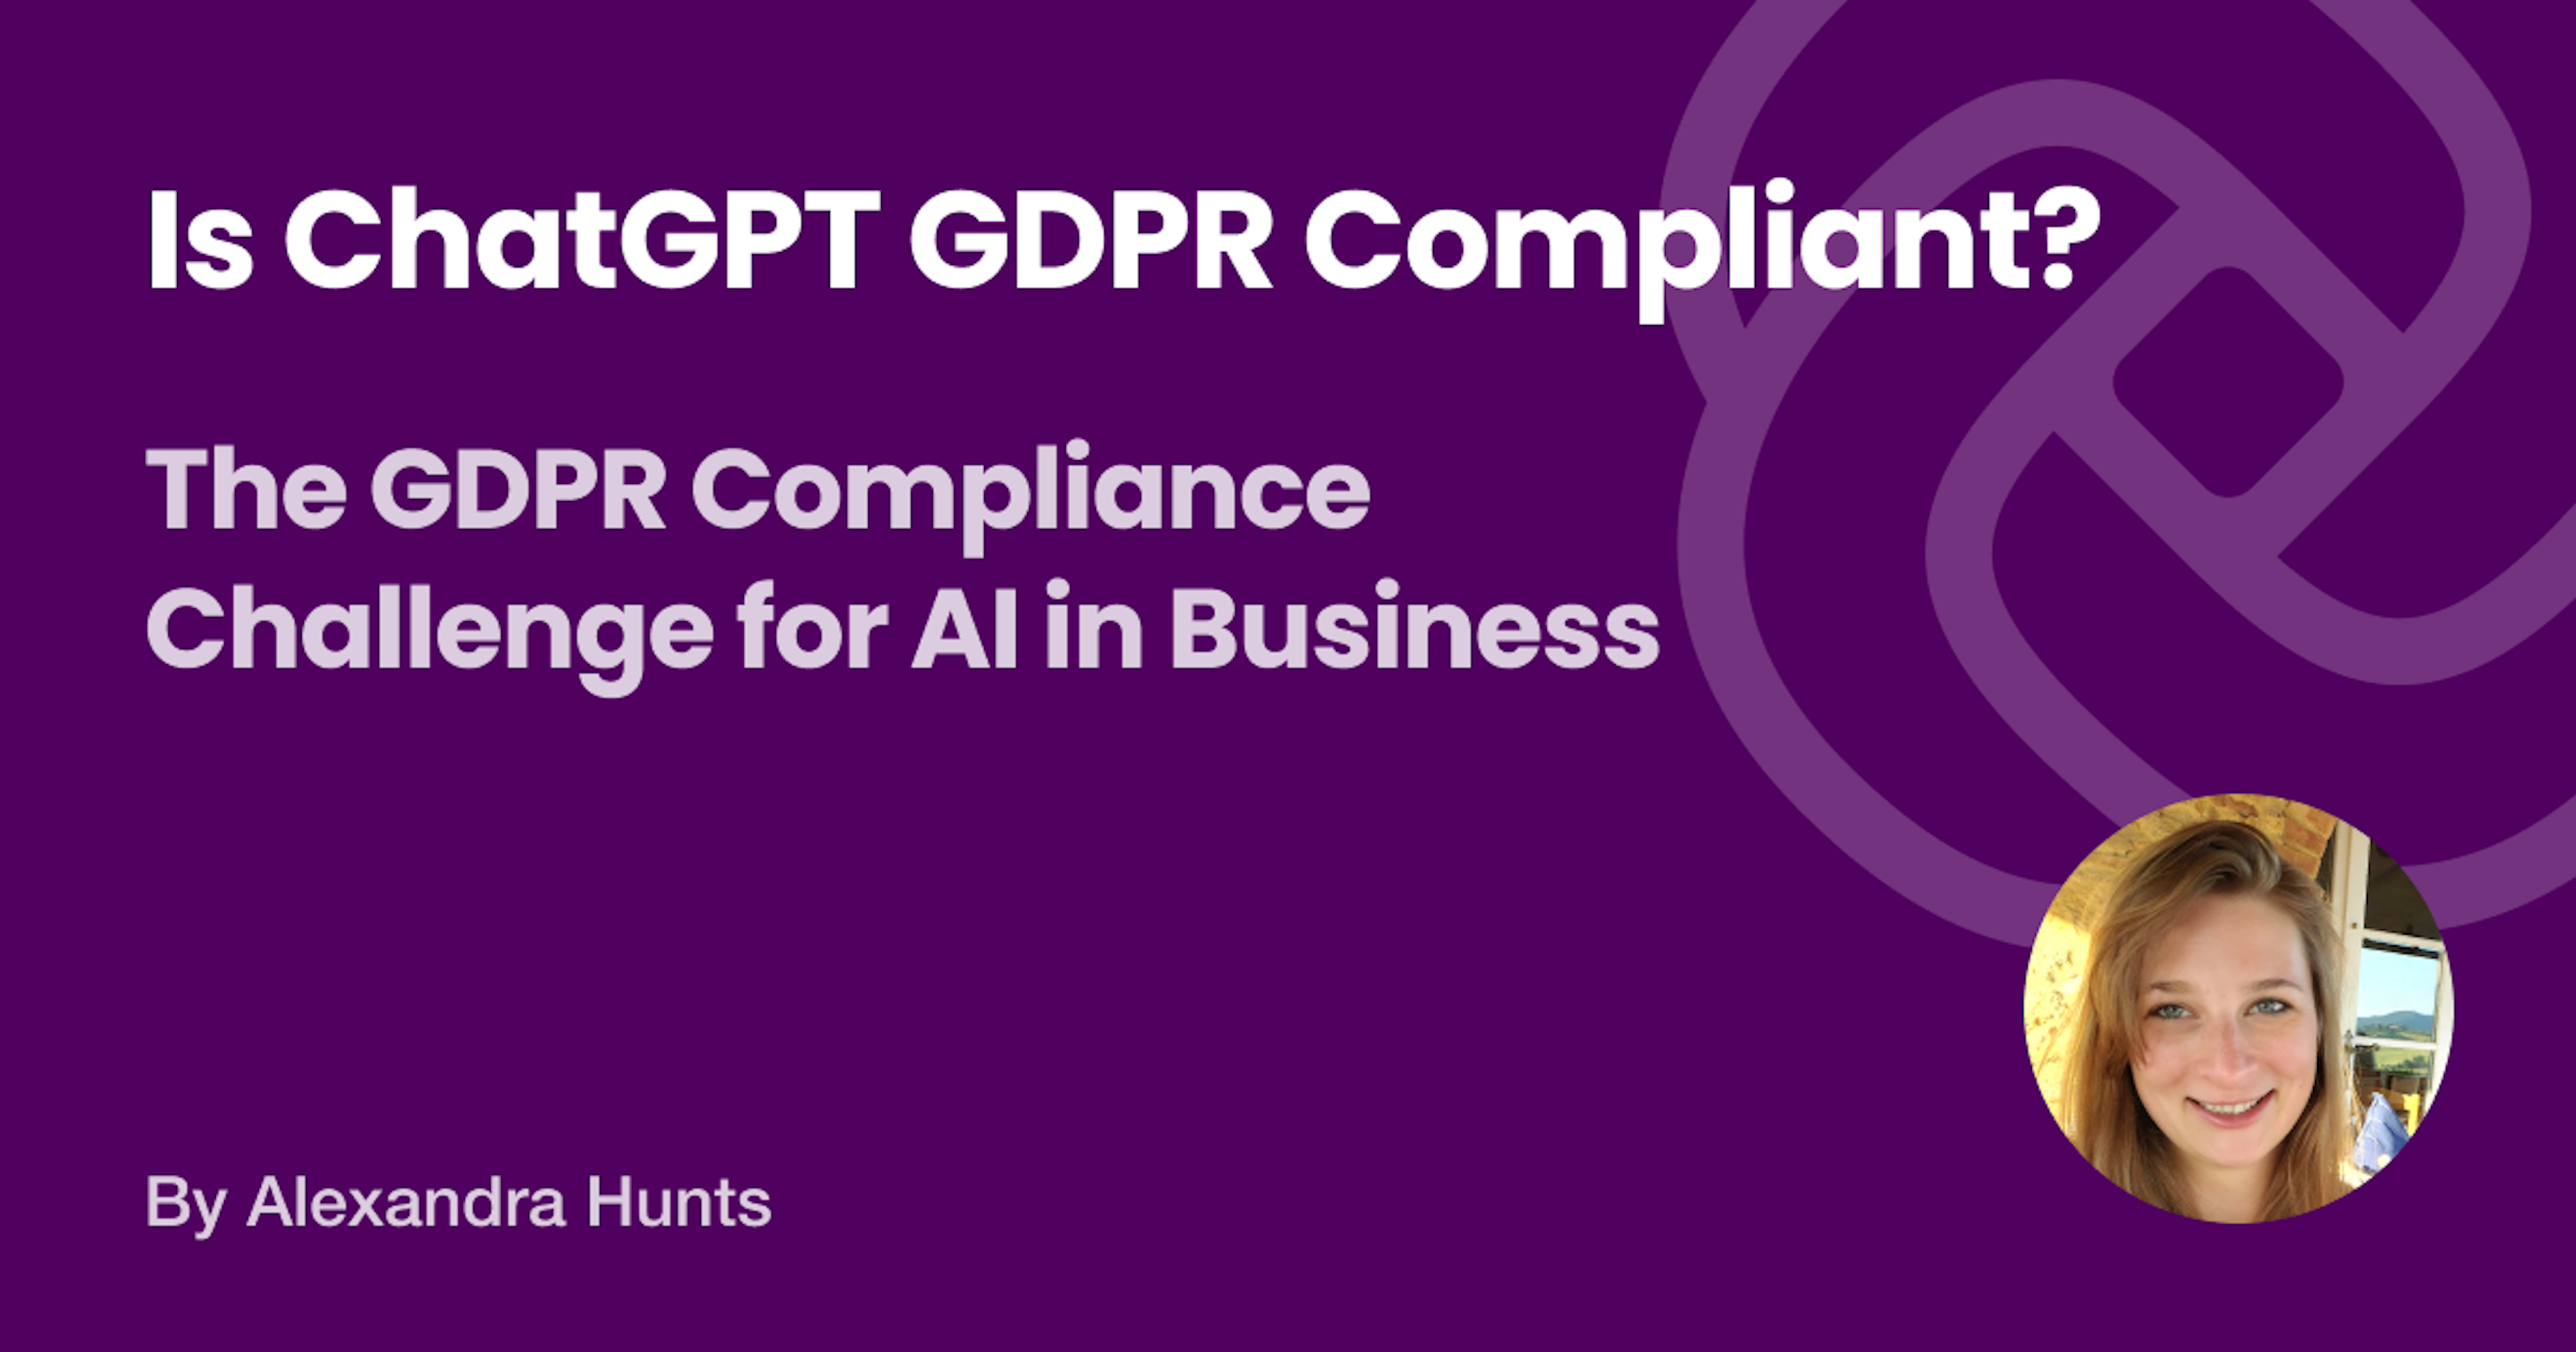 Amidst rising scrutiny, ChatGPT's GDPR compliance is put to the test, spotlighting the critical balance between AI innovation and data privacy standards.